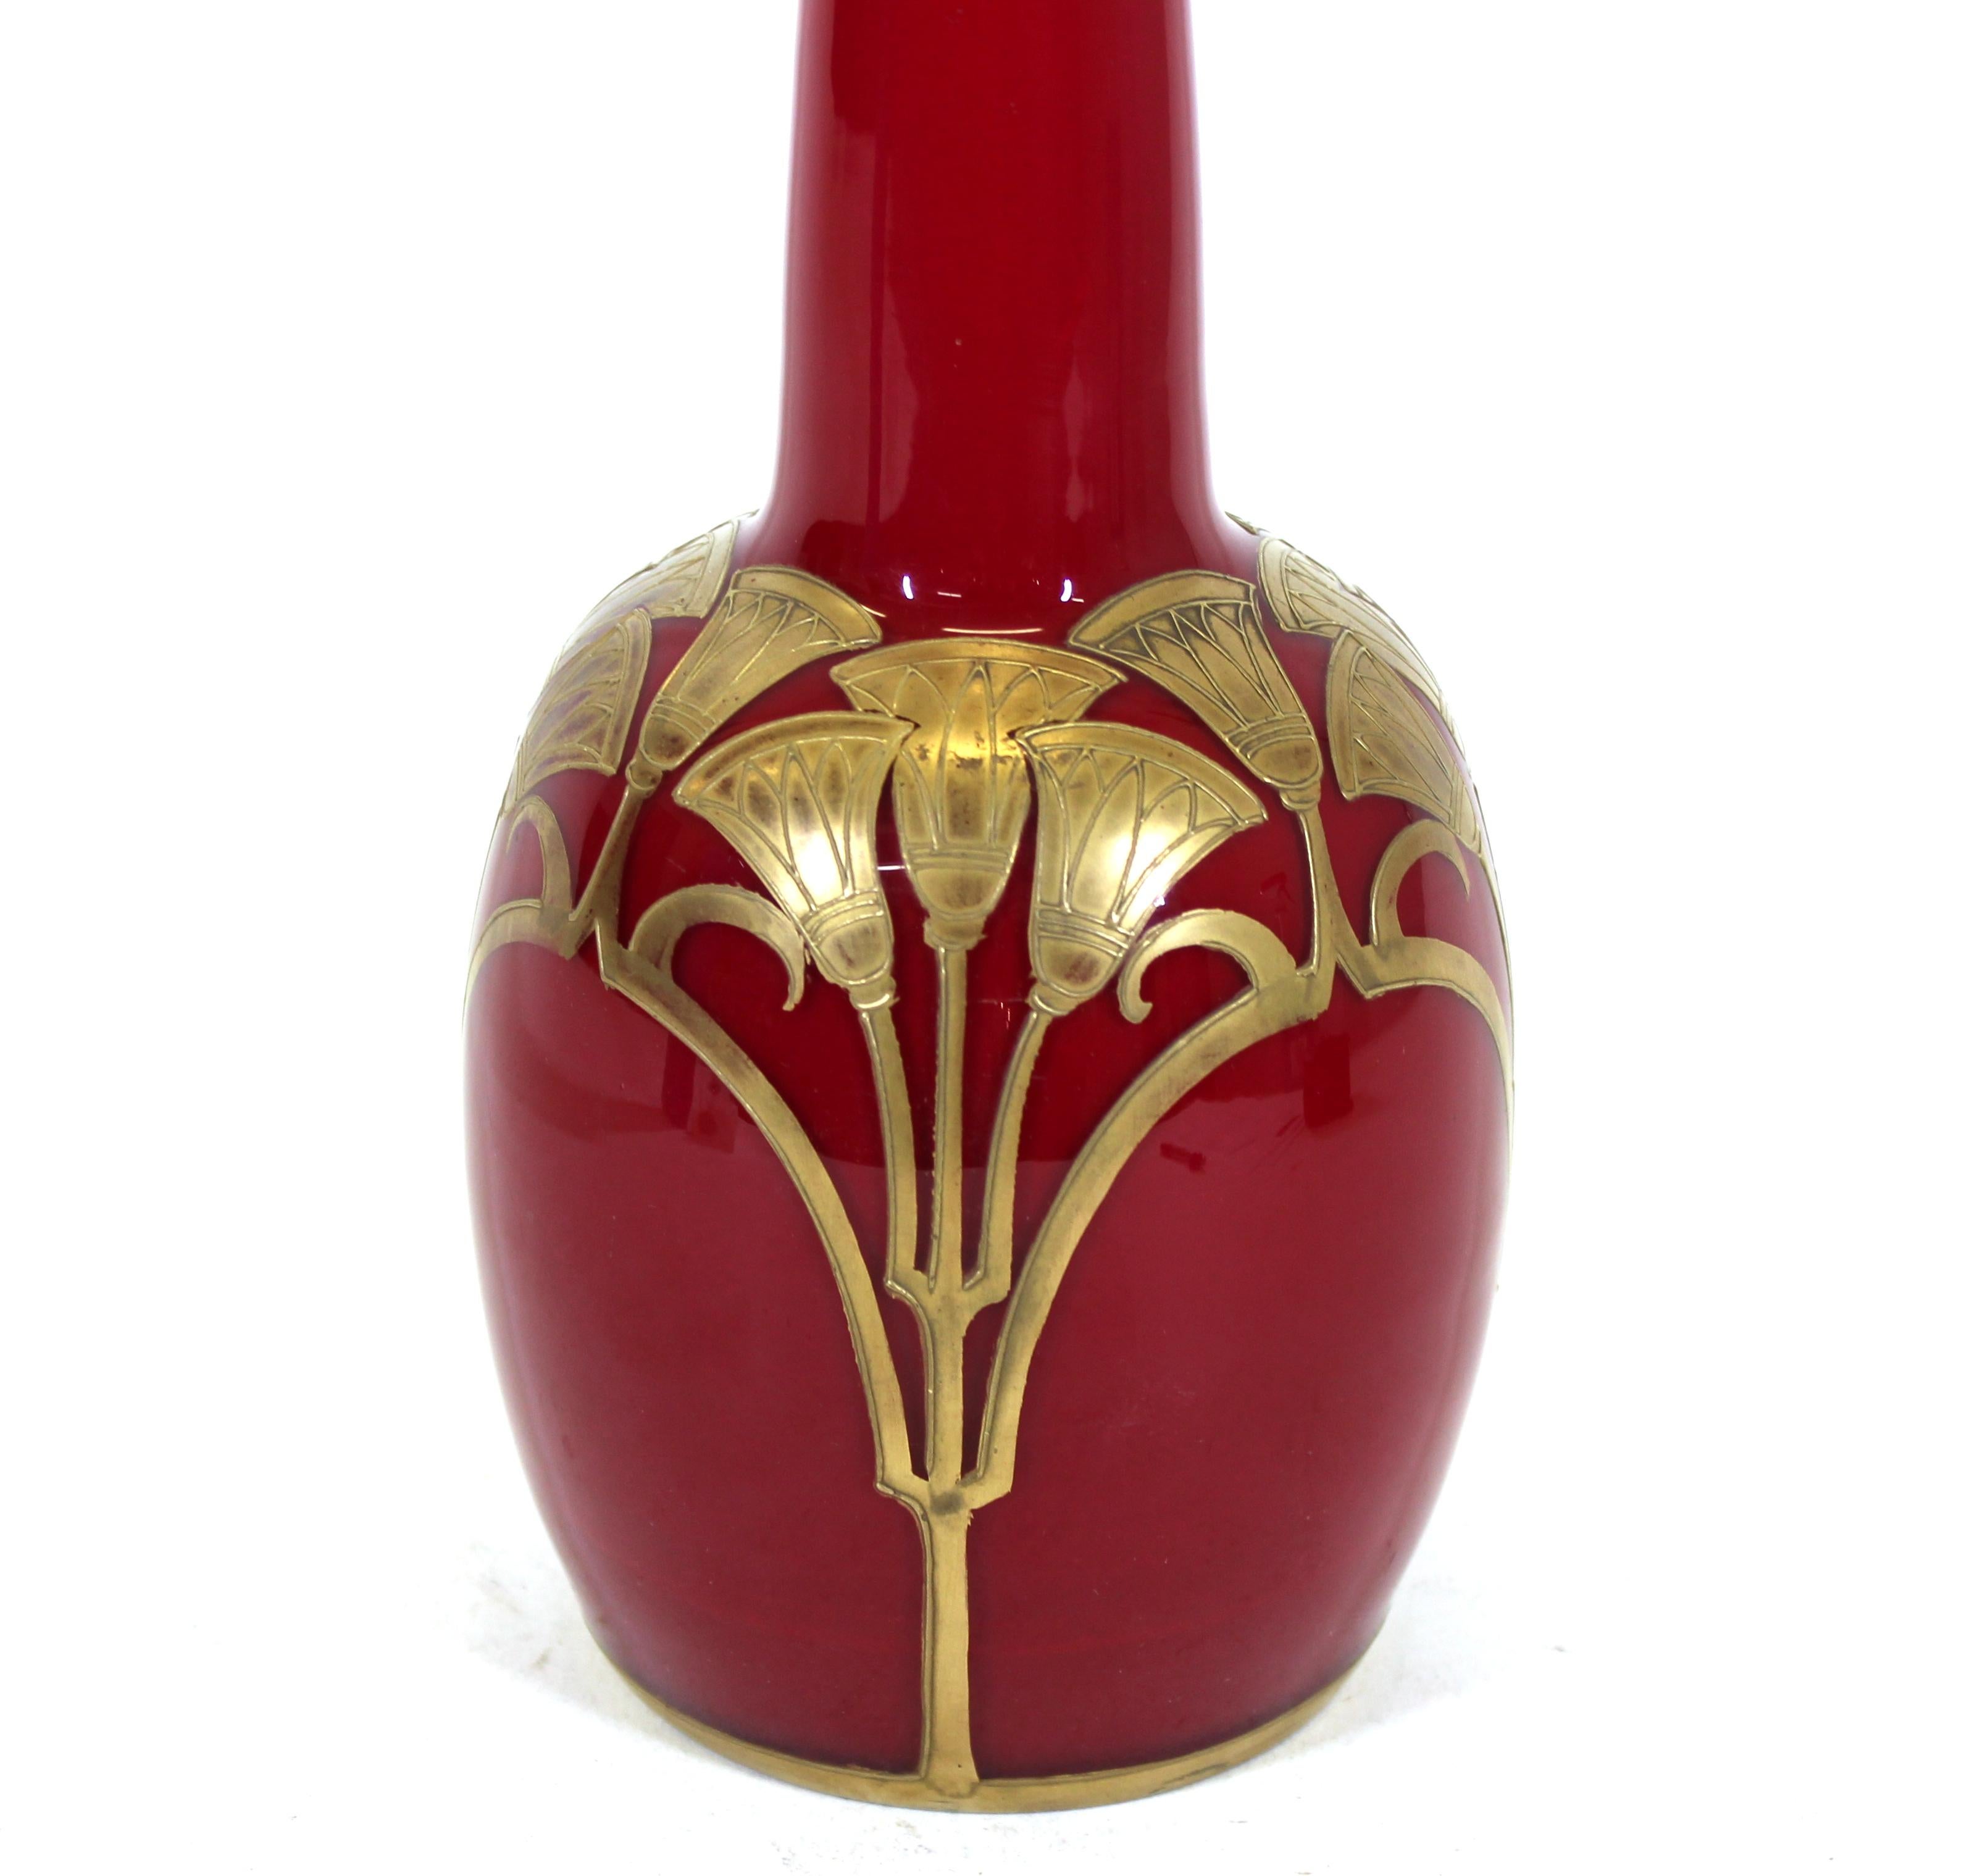 Legras Saint Denis French Egyptian Revival blown 'rouge de chine' red glass vase over white opaline glass and enameled and gilt with 24K gold lotus motif. Marked on the bottom. In remarkable antique condition with age-appropriate wear.